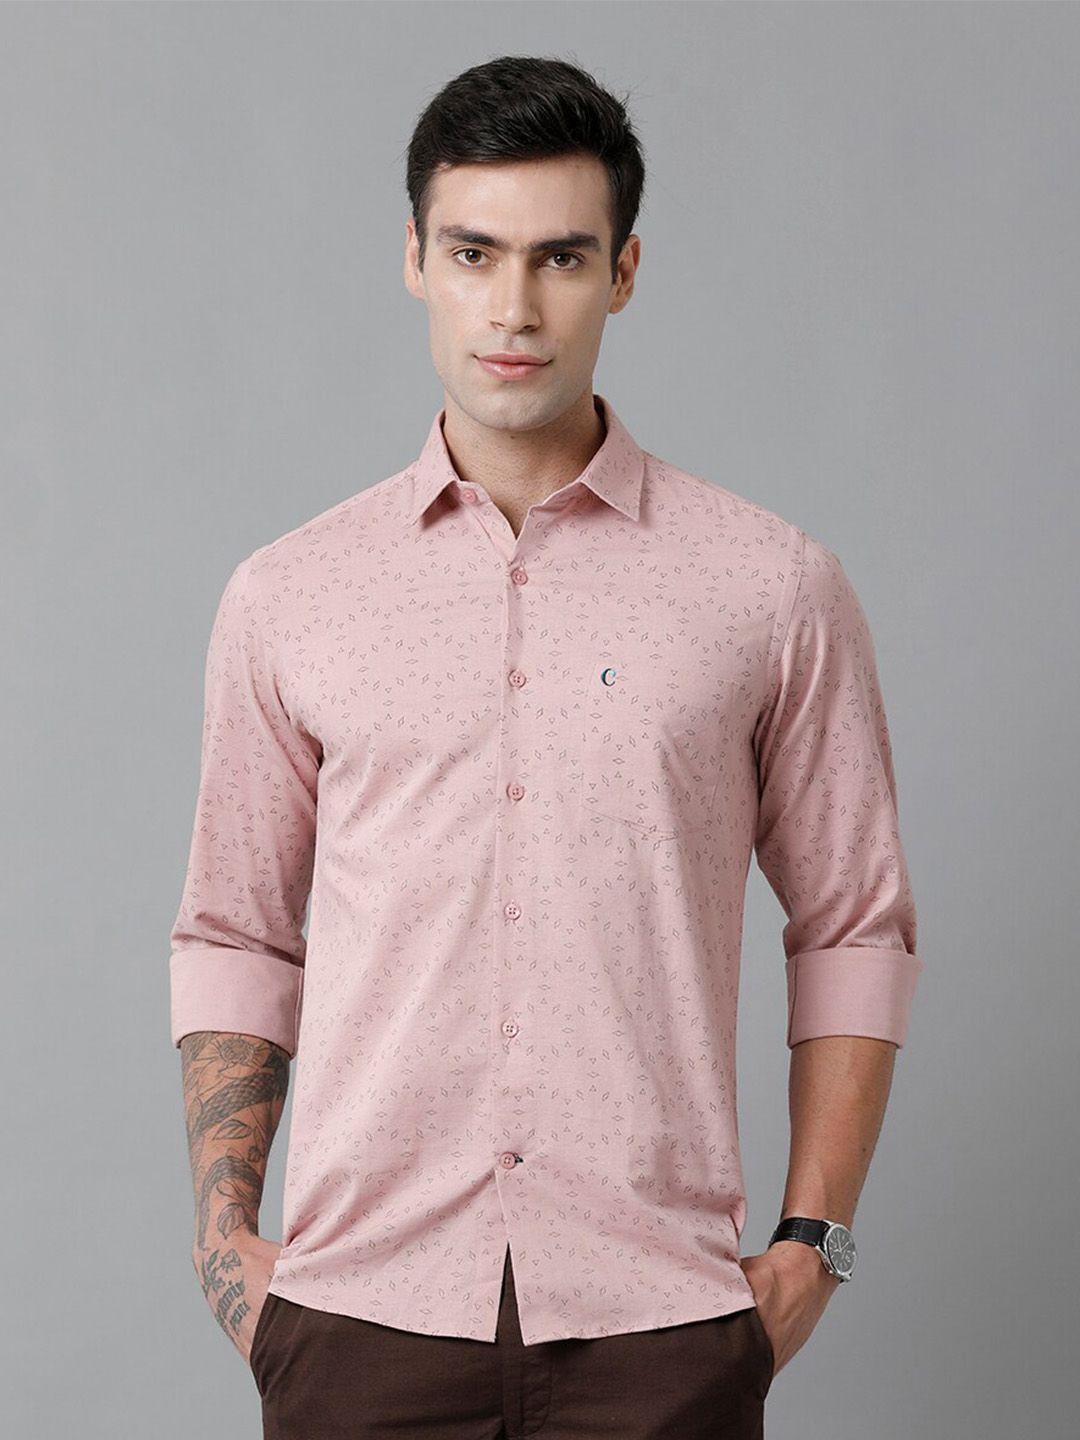 cavallo by linen club contemporary geometric printed slim fit casual shirt